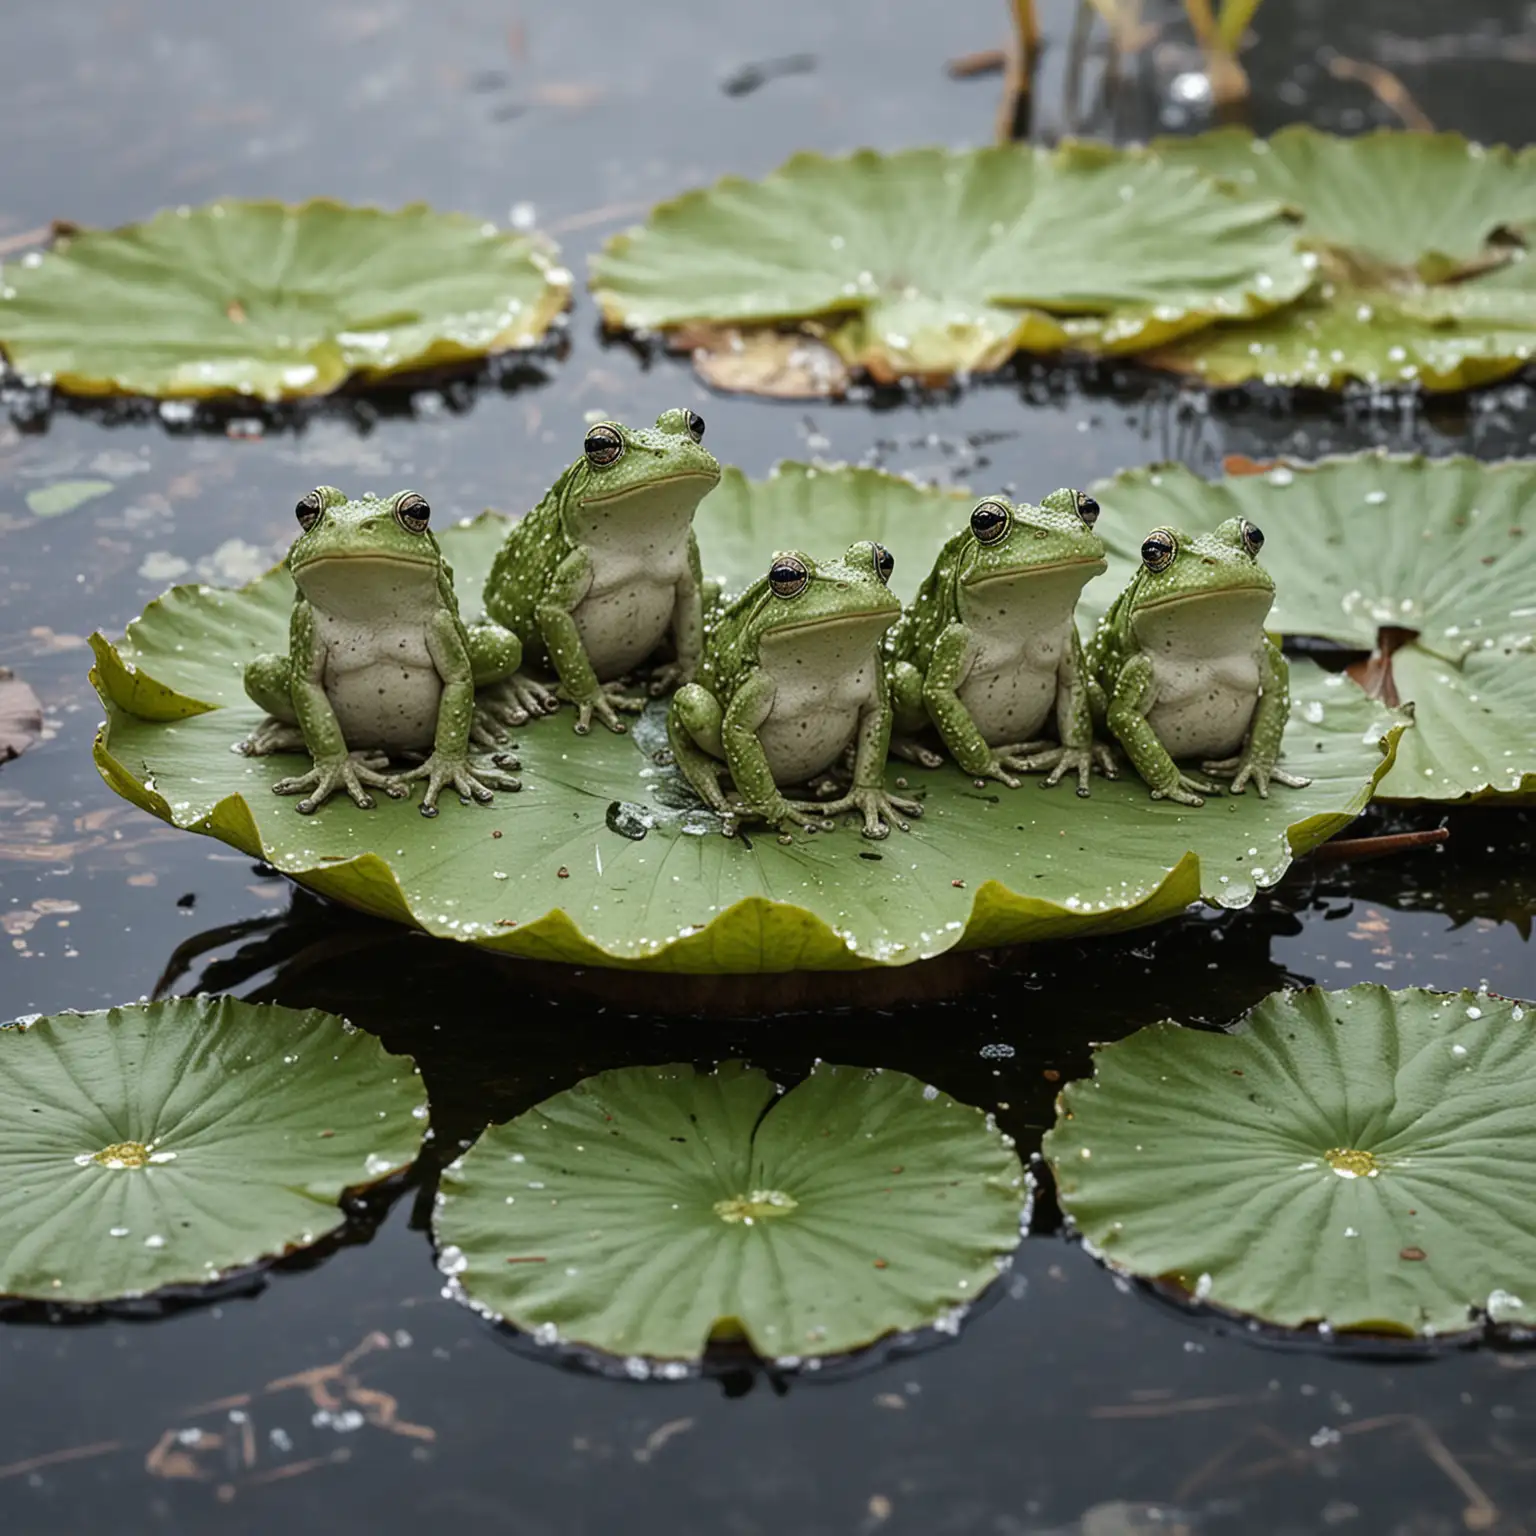 Five Little Speckled Frogs on Lily Pads by Frosty Pond